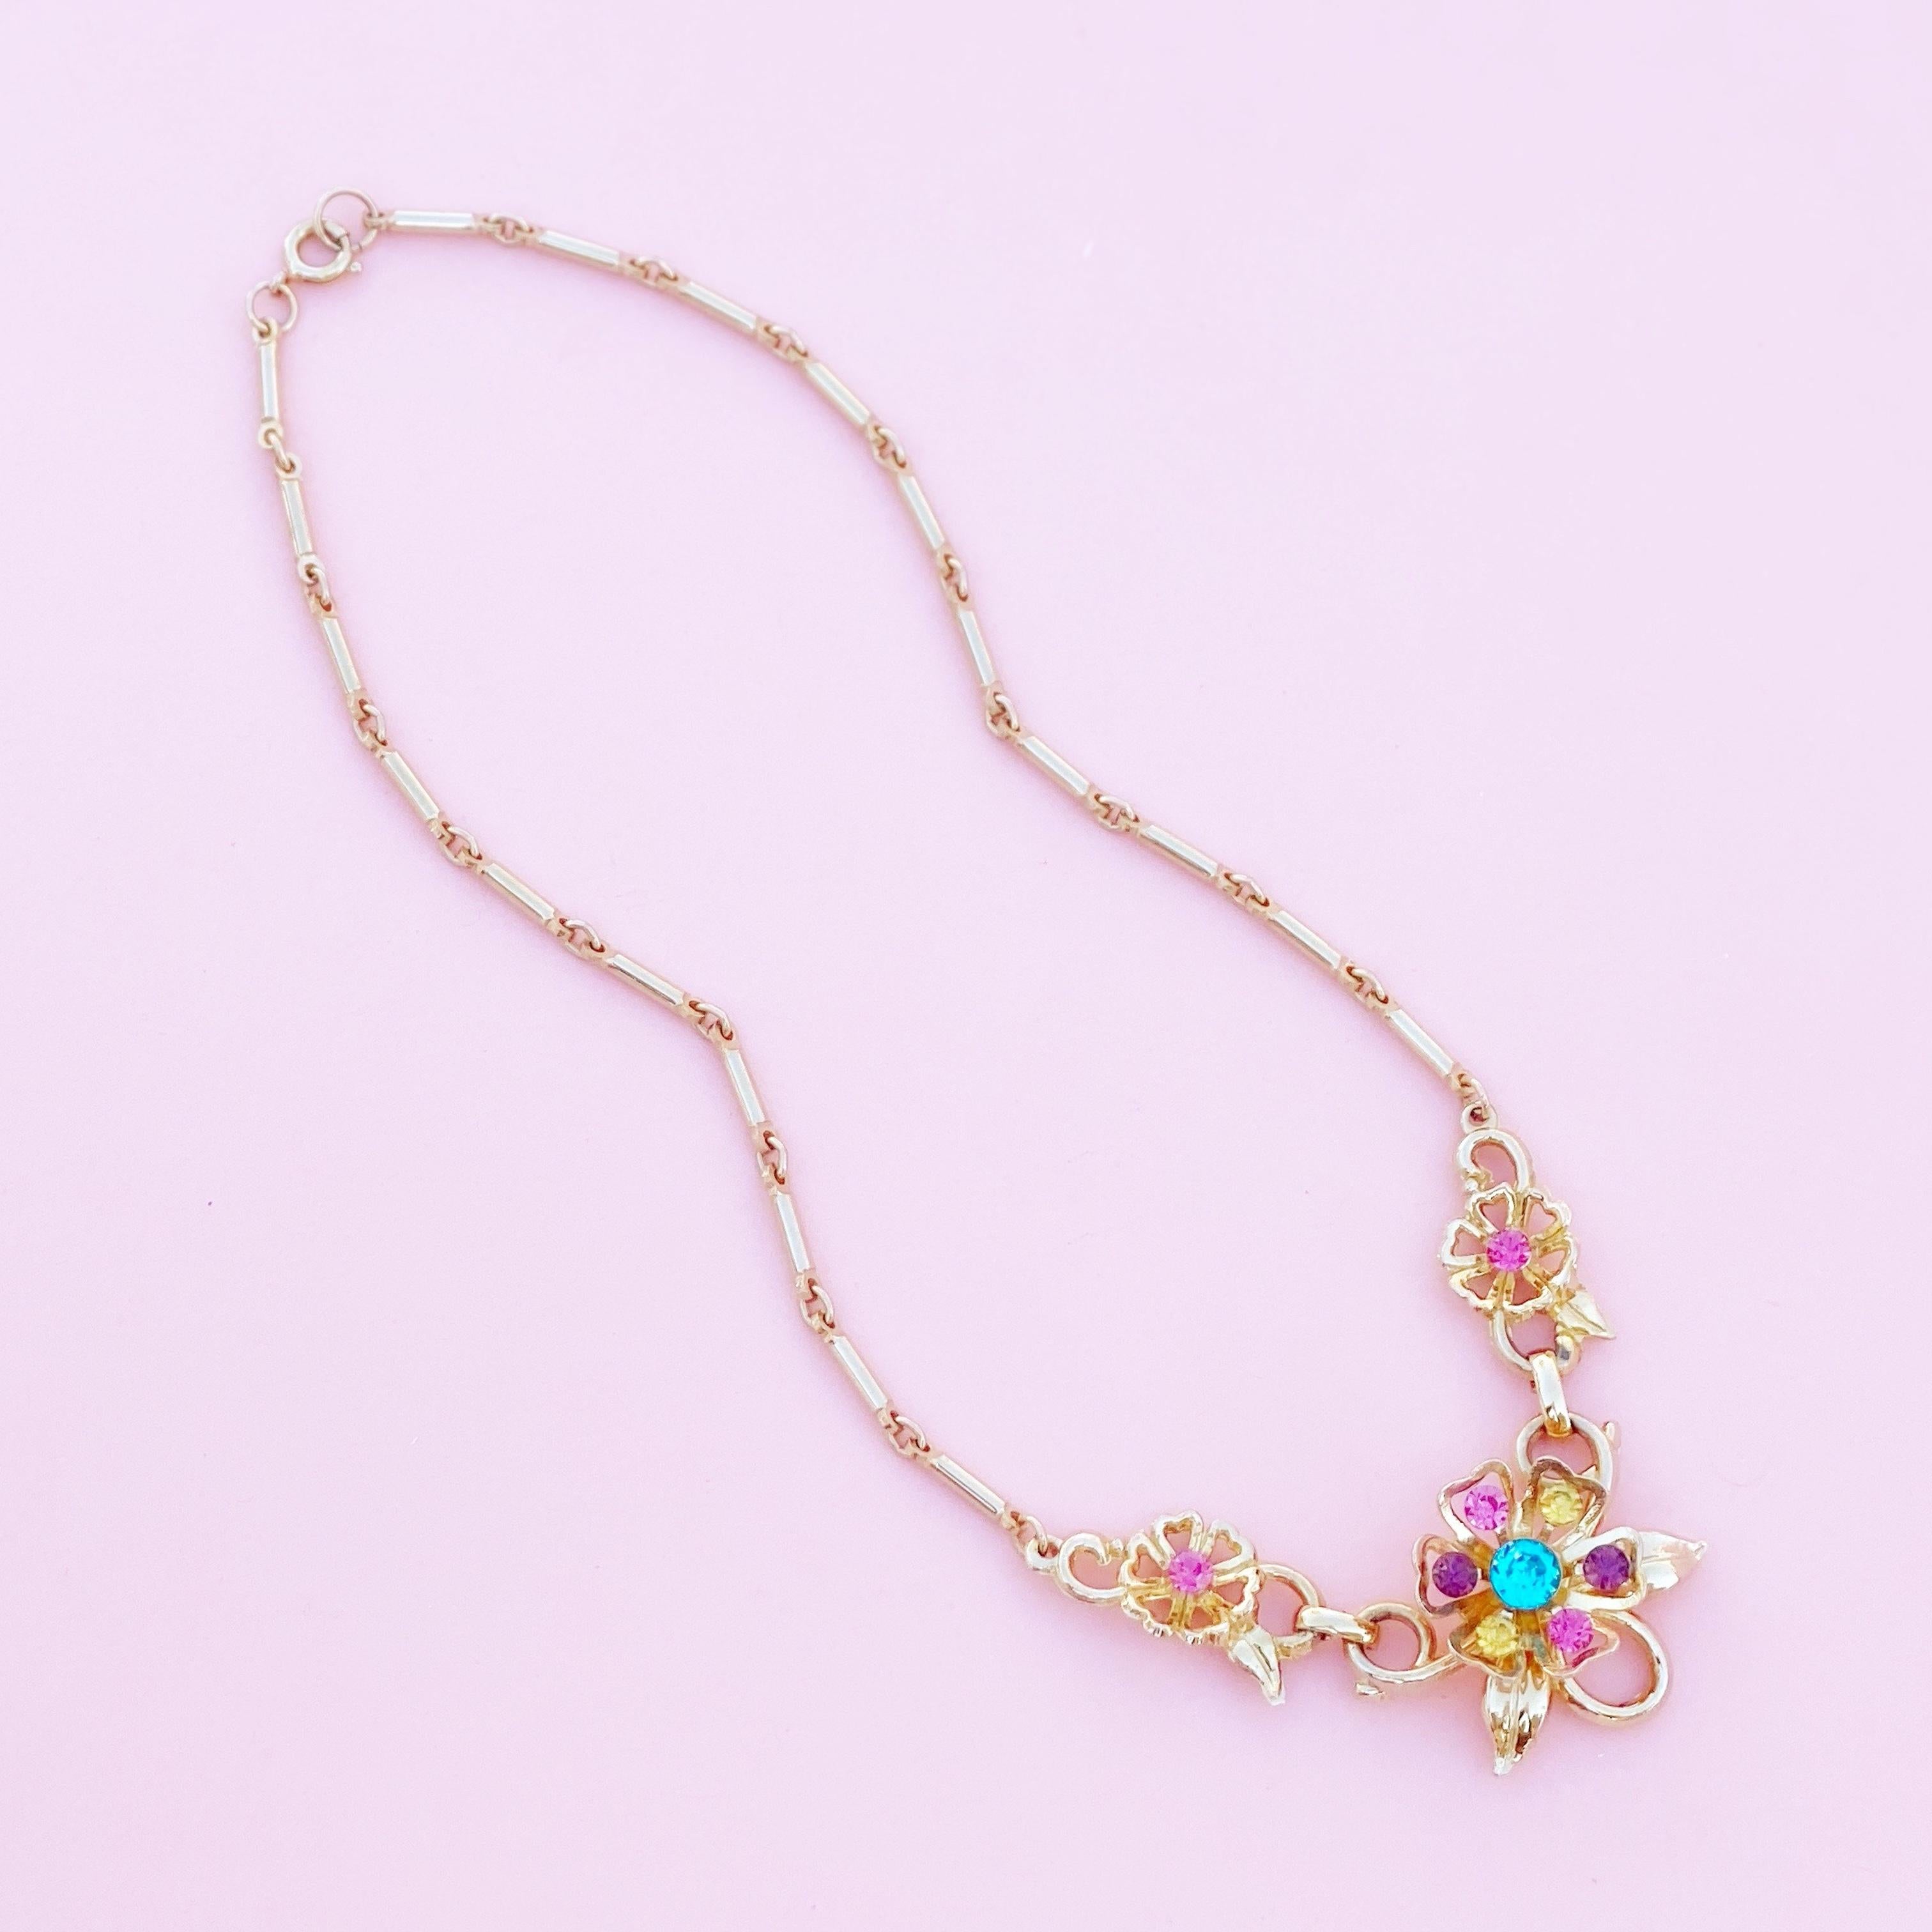 Modern Vintage Gilded Rainbow Crystal Flower Necklace By Coro, 1950s